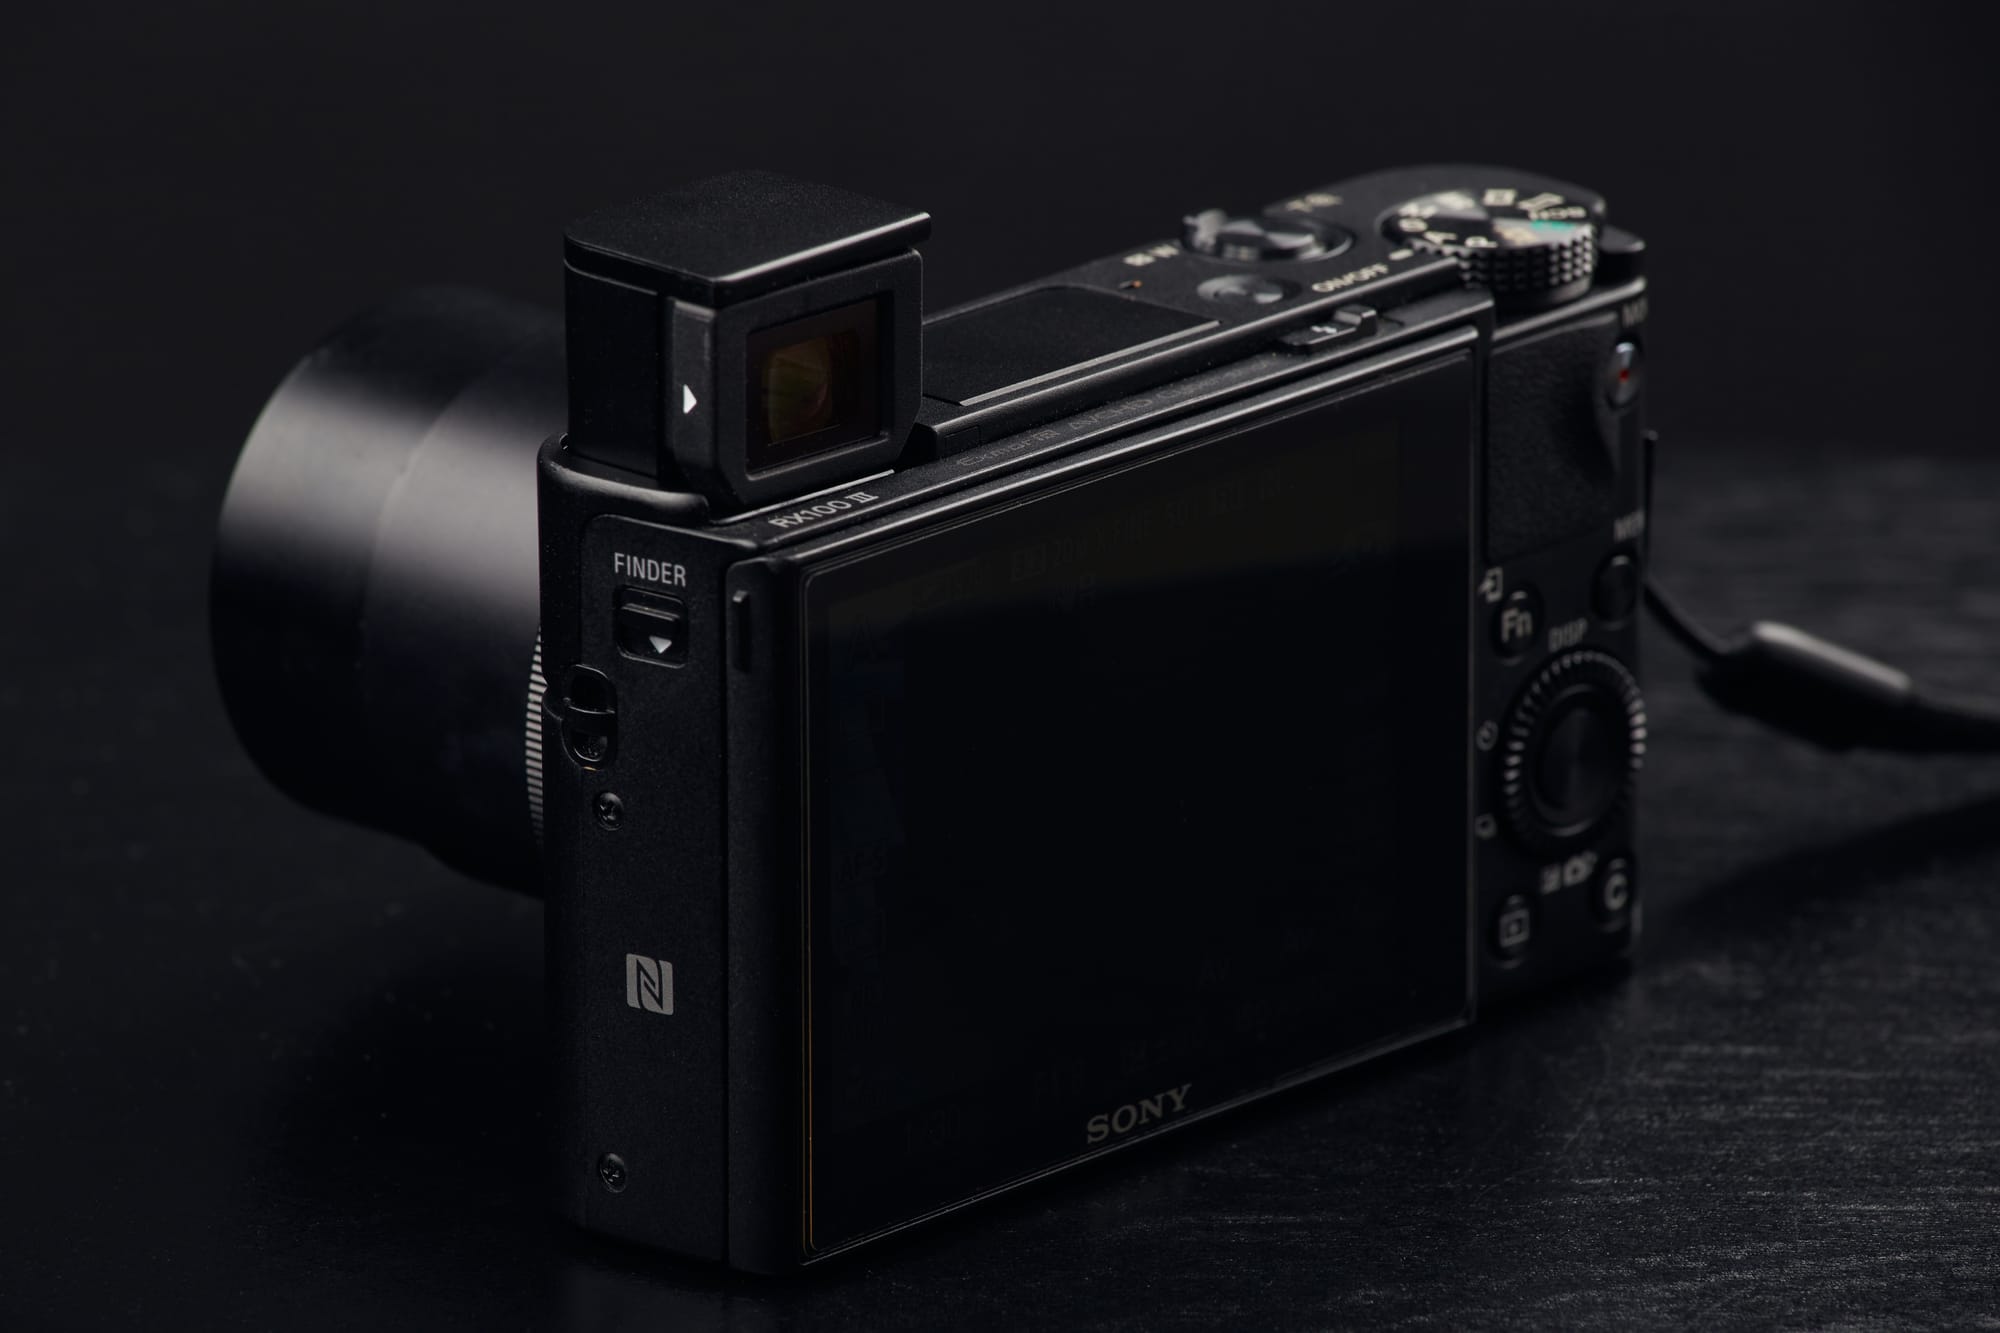 A Review Of The Sony Cyber-shot DSC-RX100 III